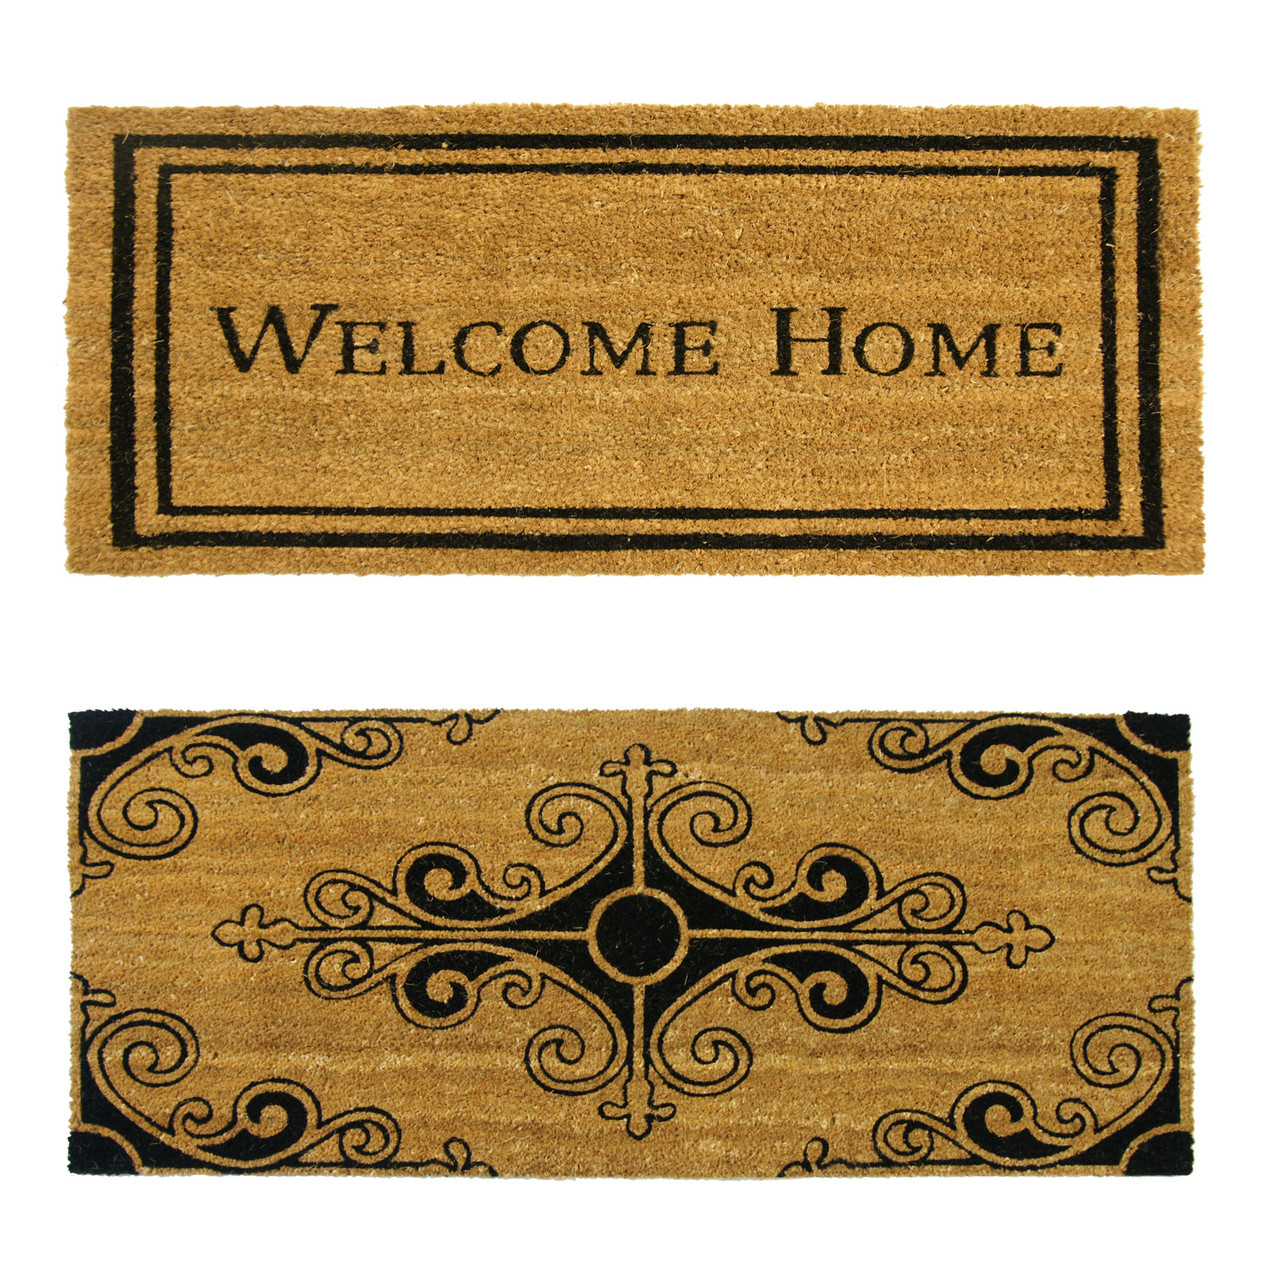 https://cdn11.bigcommerce.com/s-4d9ii5h4sf/images/stencil/1280x1280/products/325/2436/contemporary-doormat-kit2__41799.1646755628.jpg?c=1